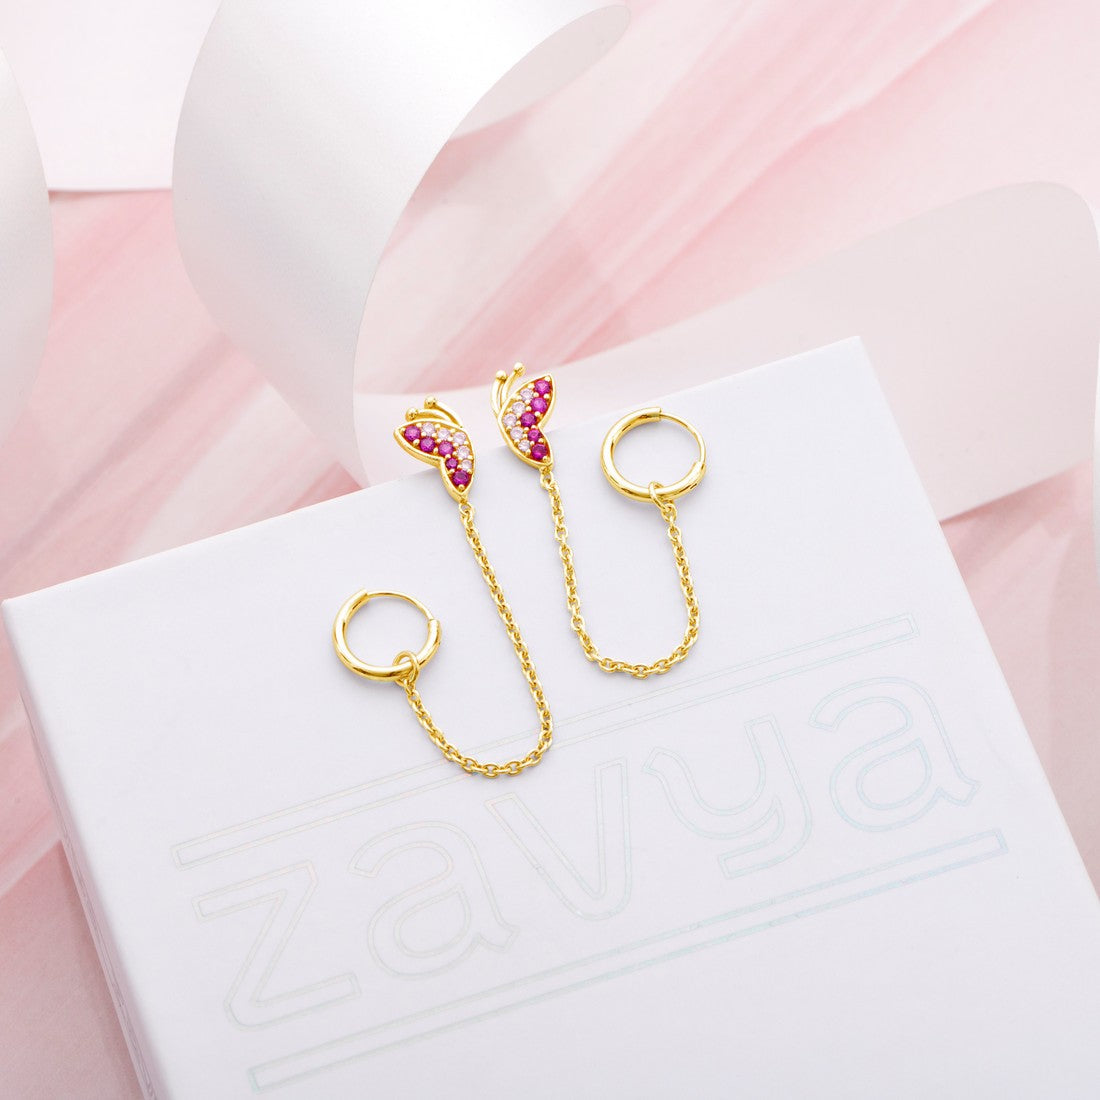 CZ Butterfly Loop Earring in 925 Gold Plated Sterling Silver